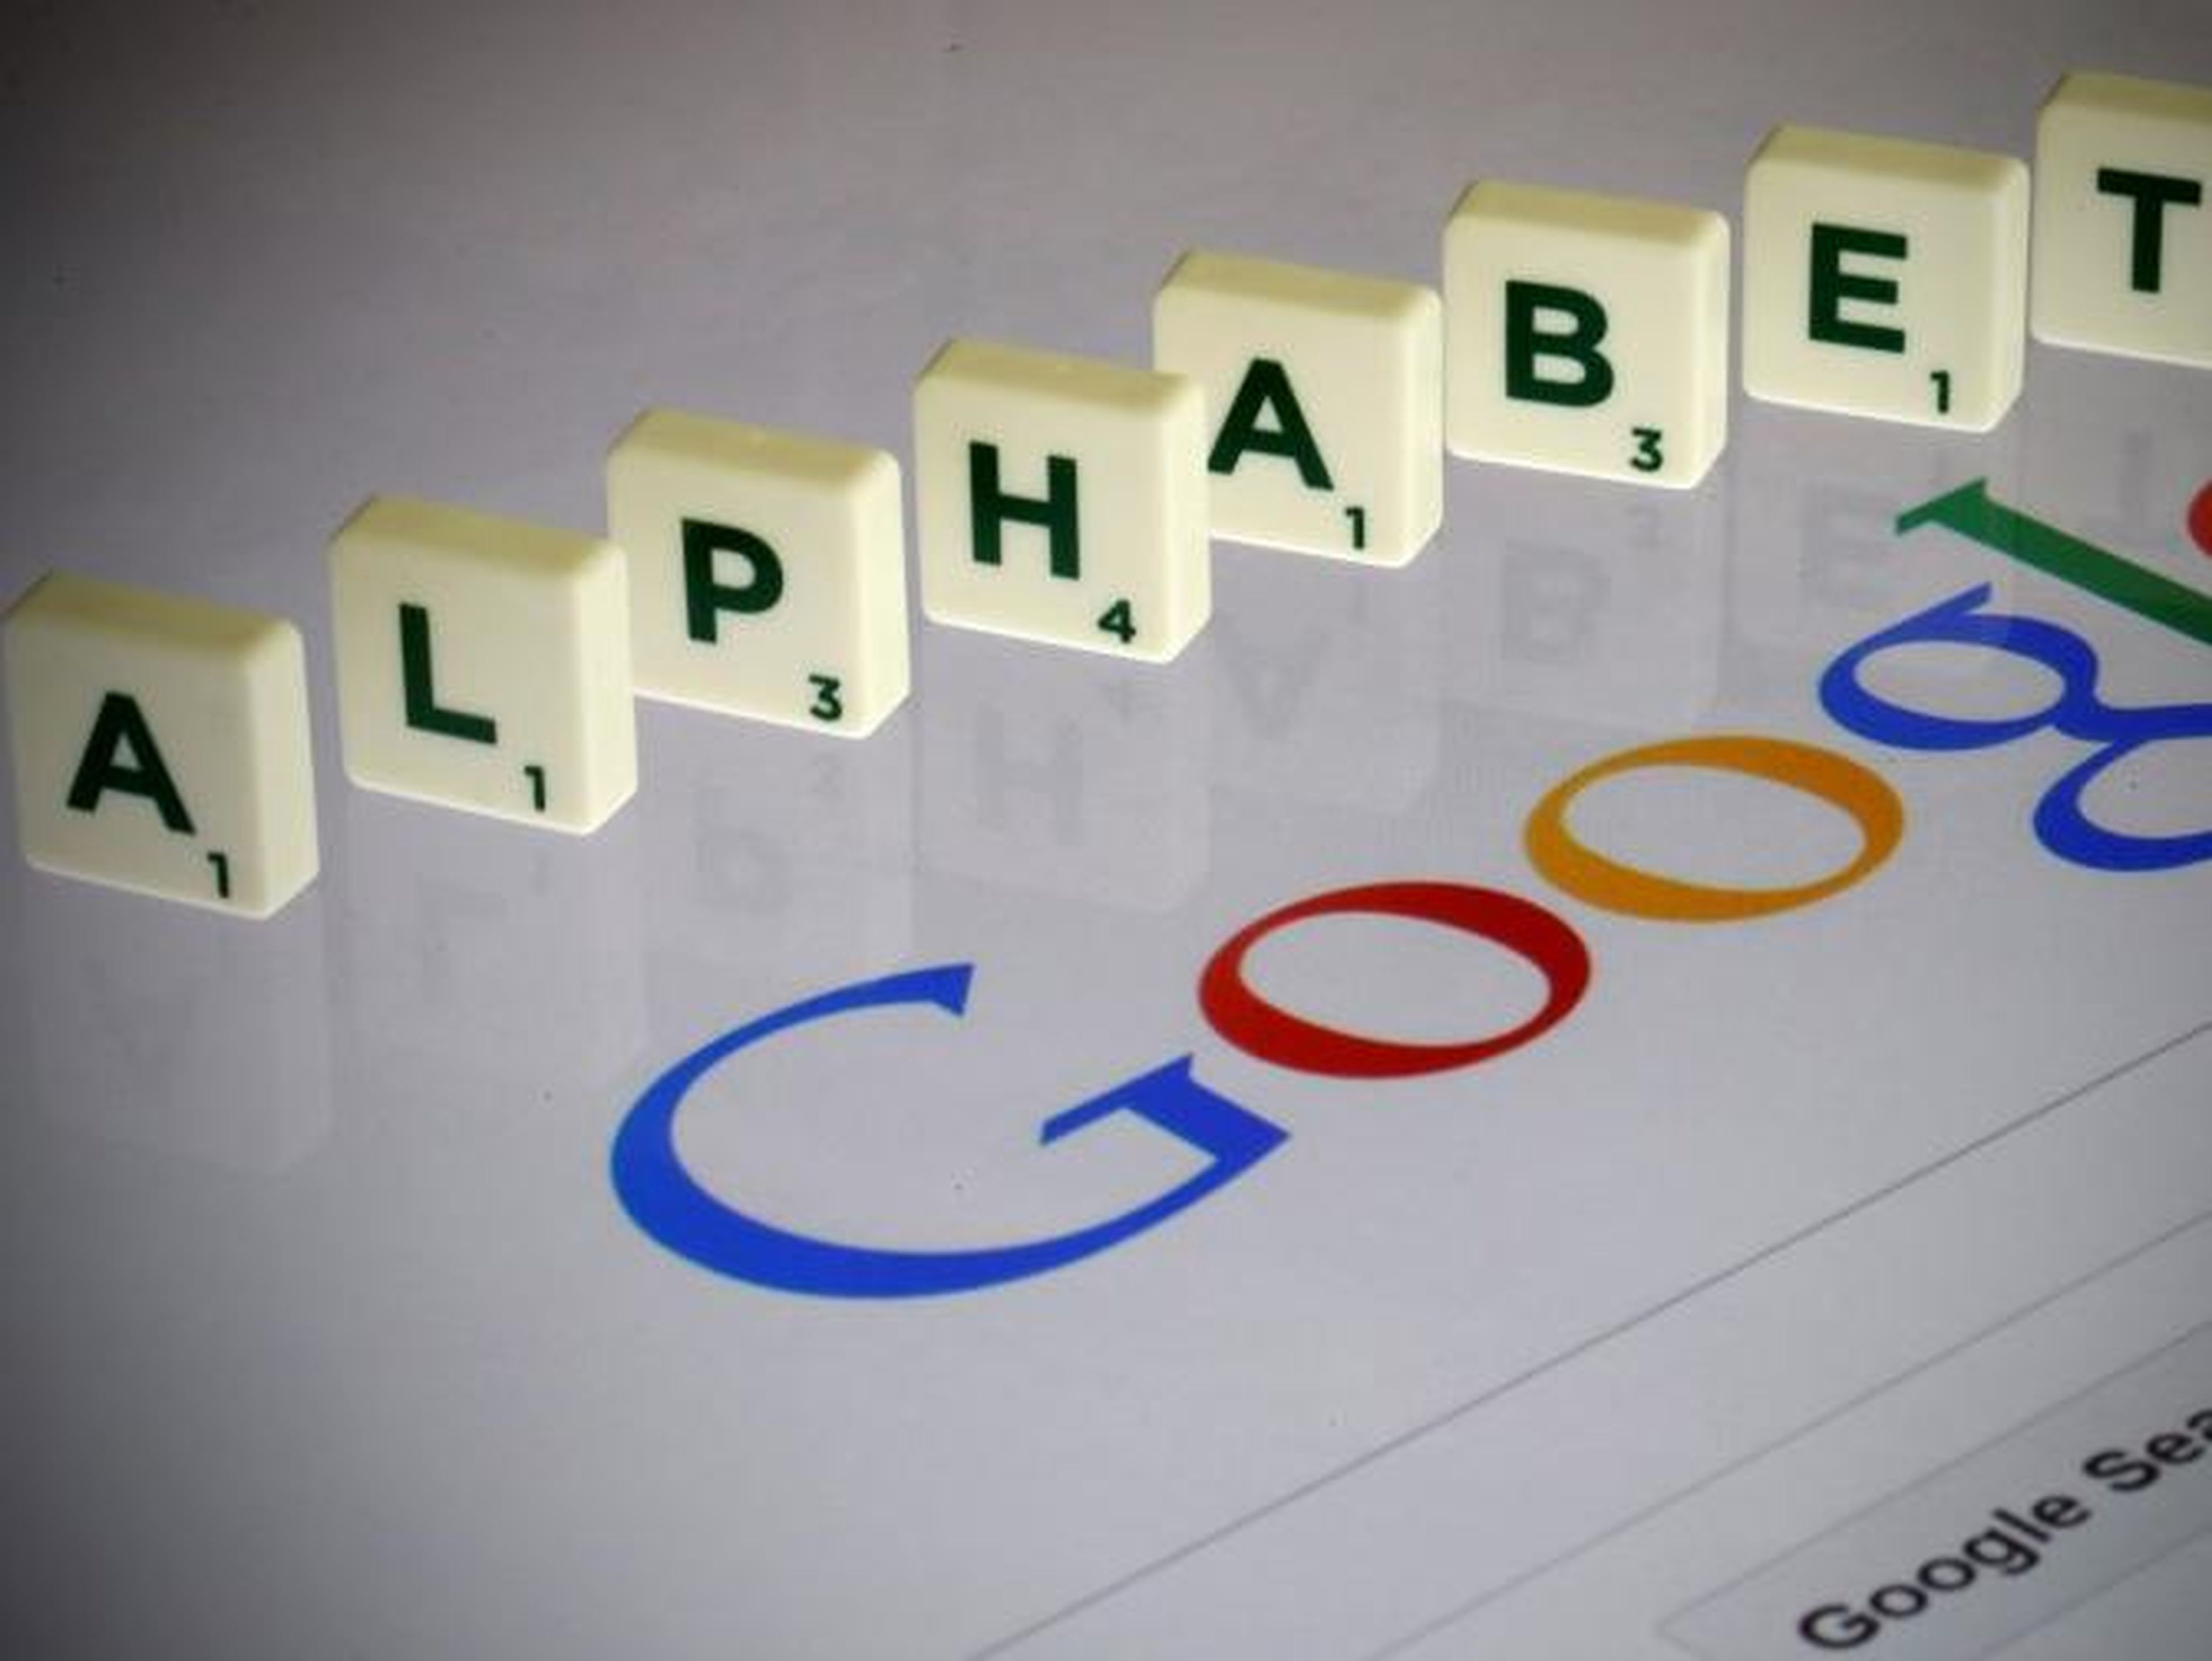 The company formerly known as Google is far bigger than most people realize